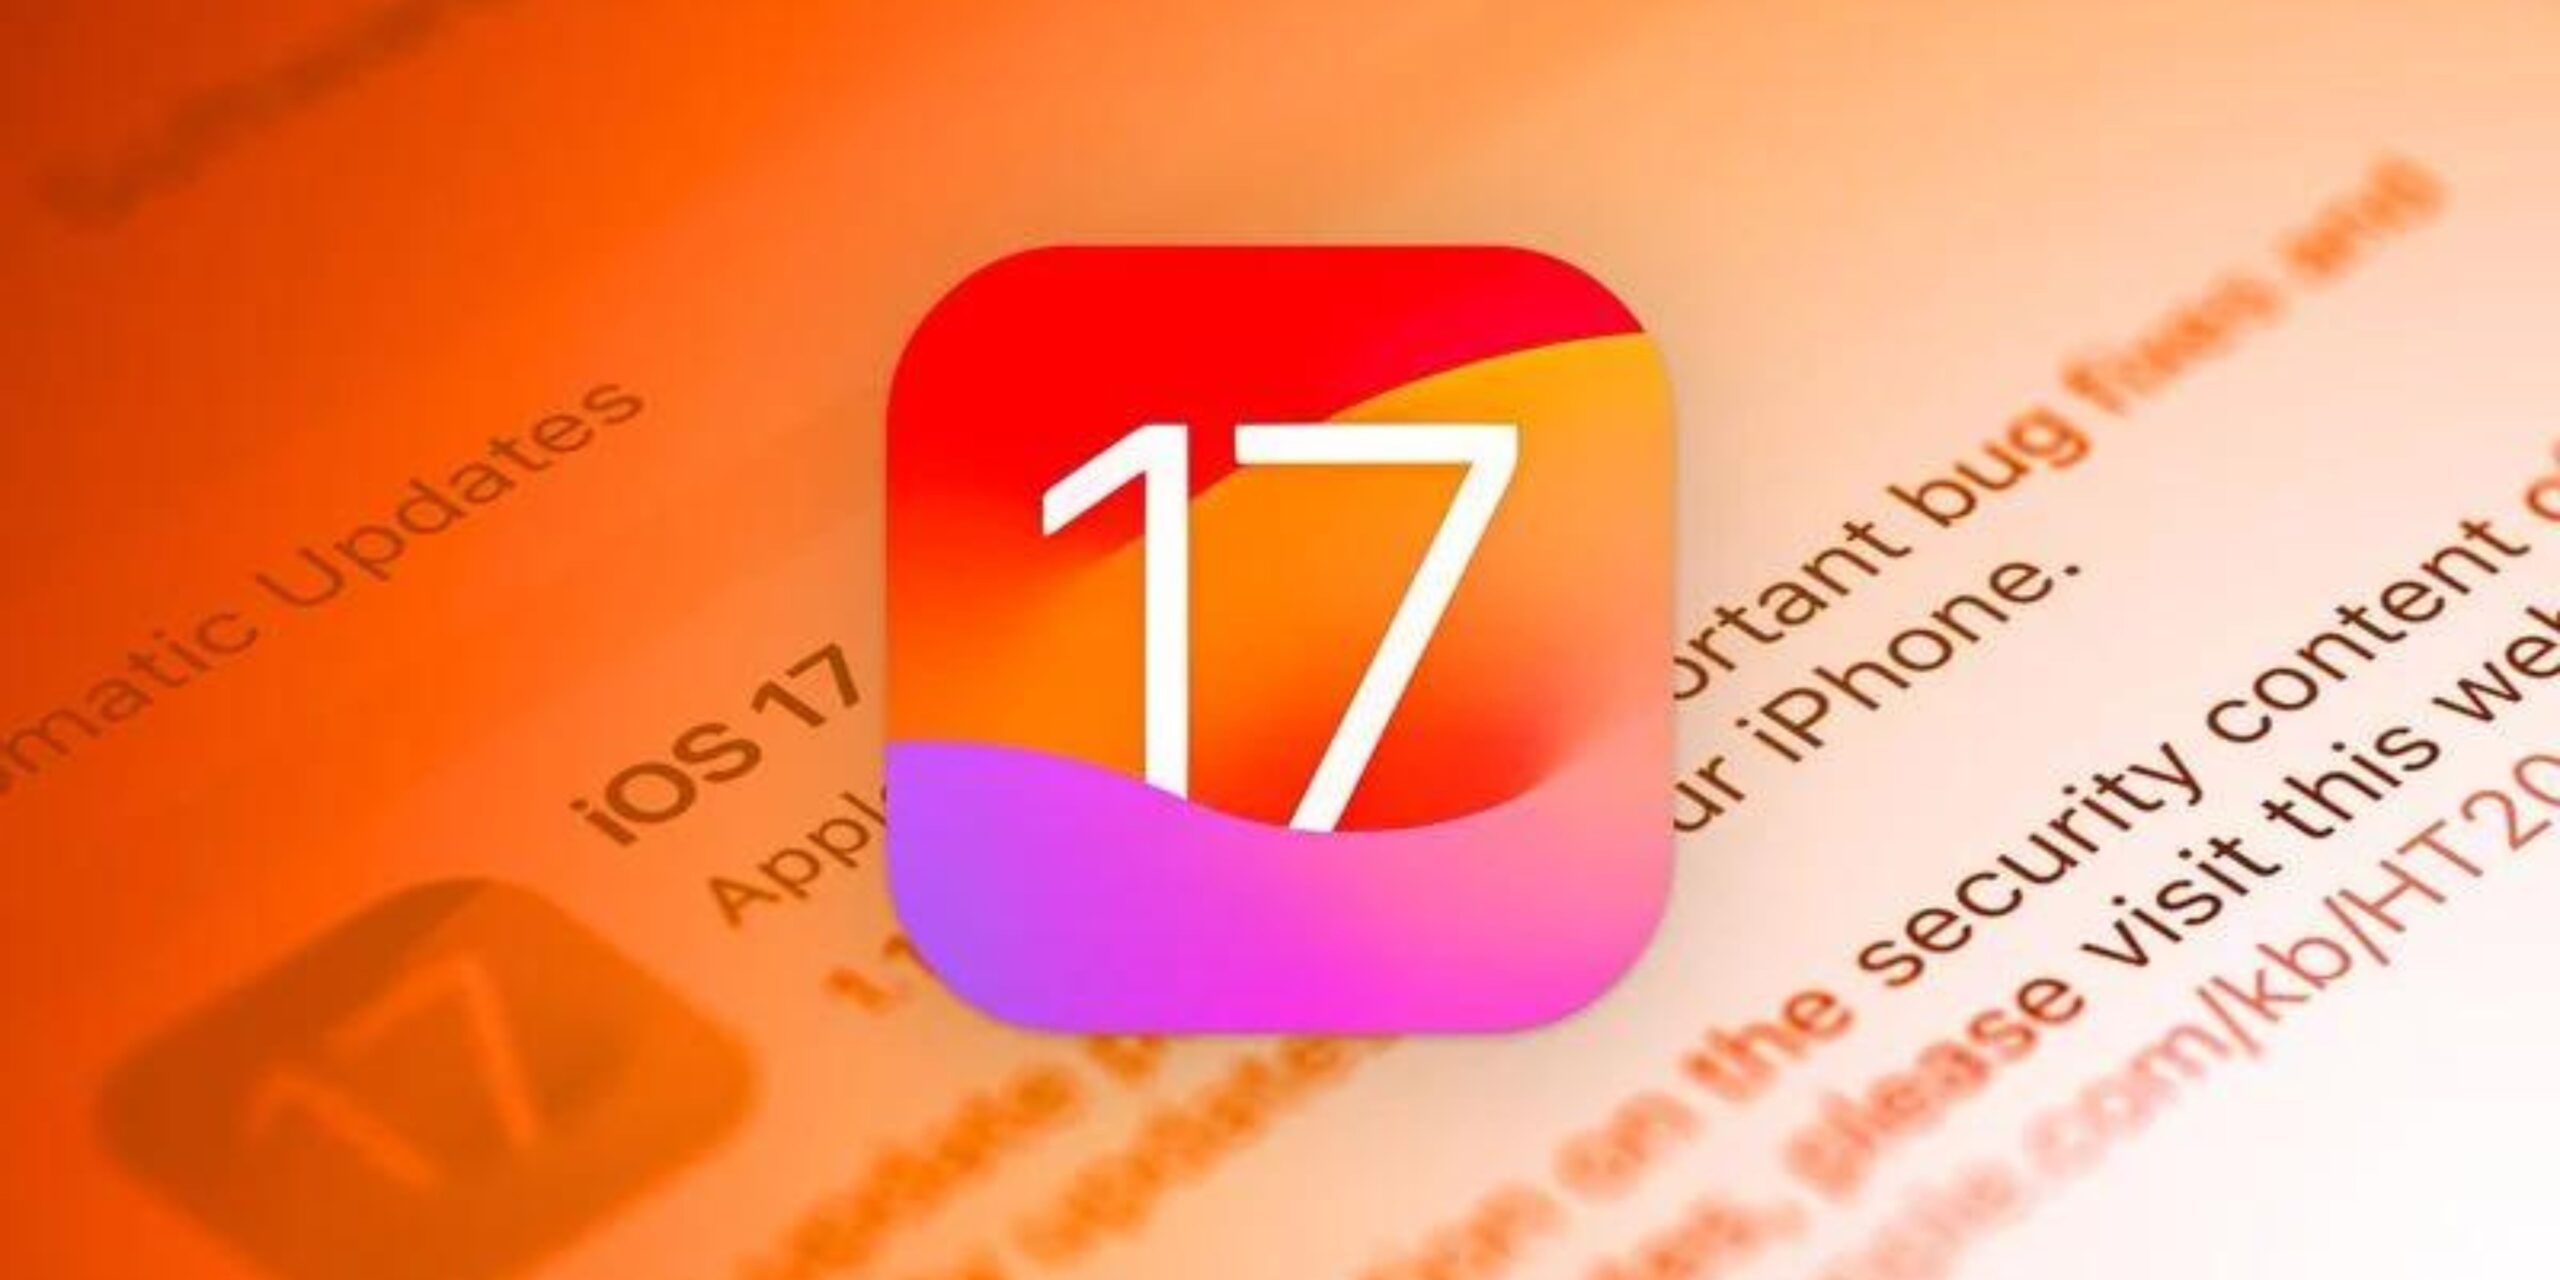 Things you need to do if you just installed iOS 17